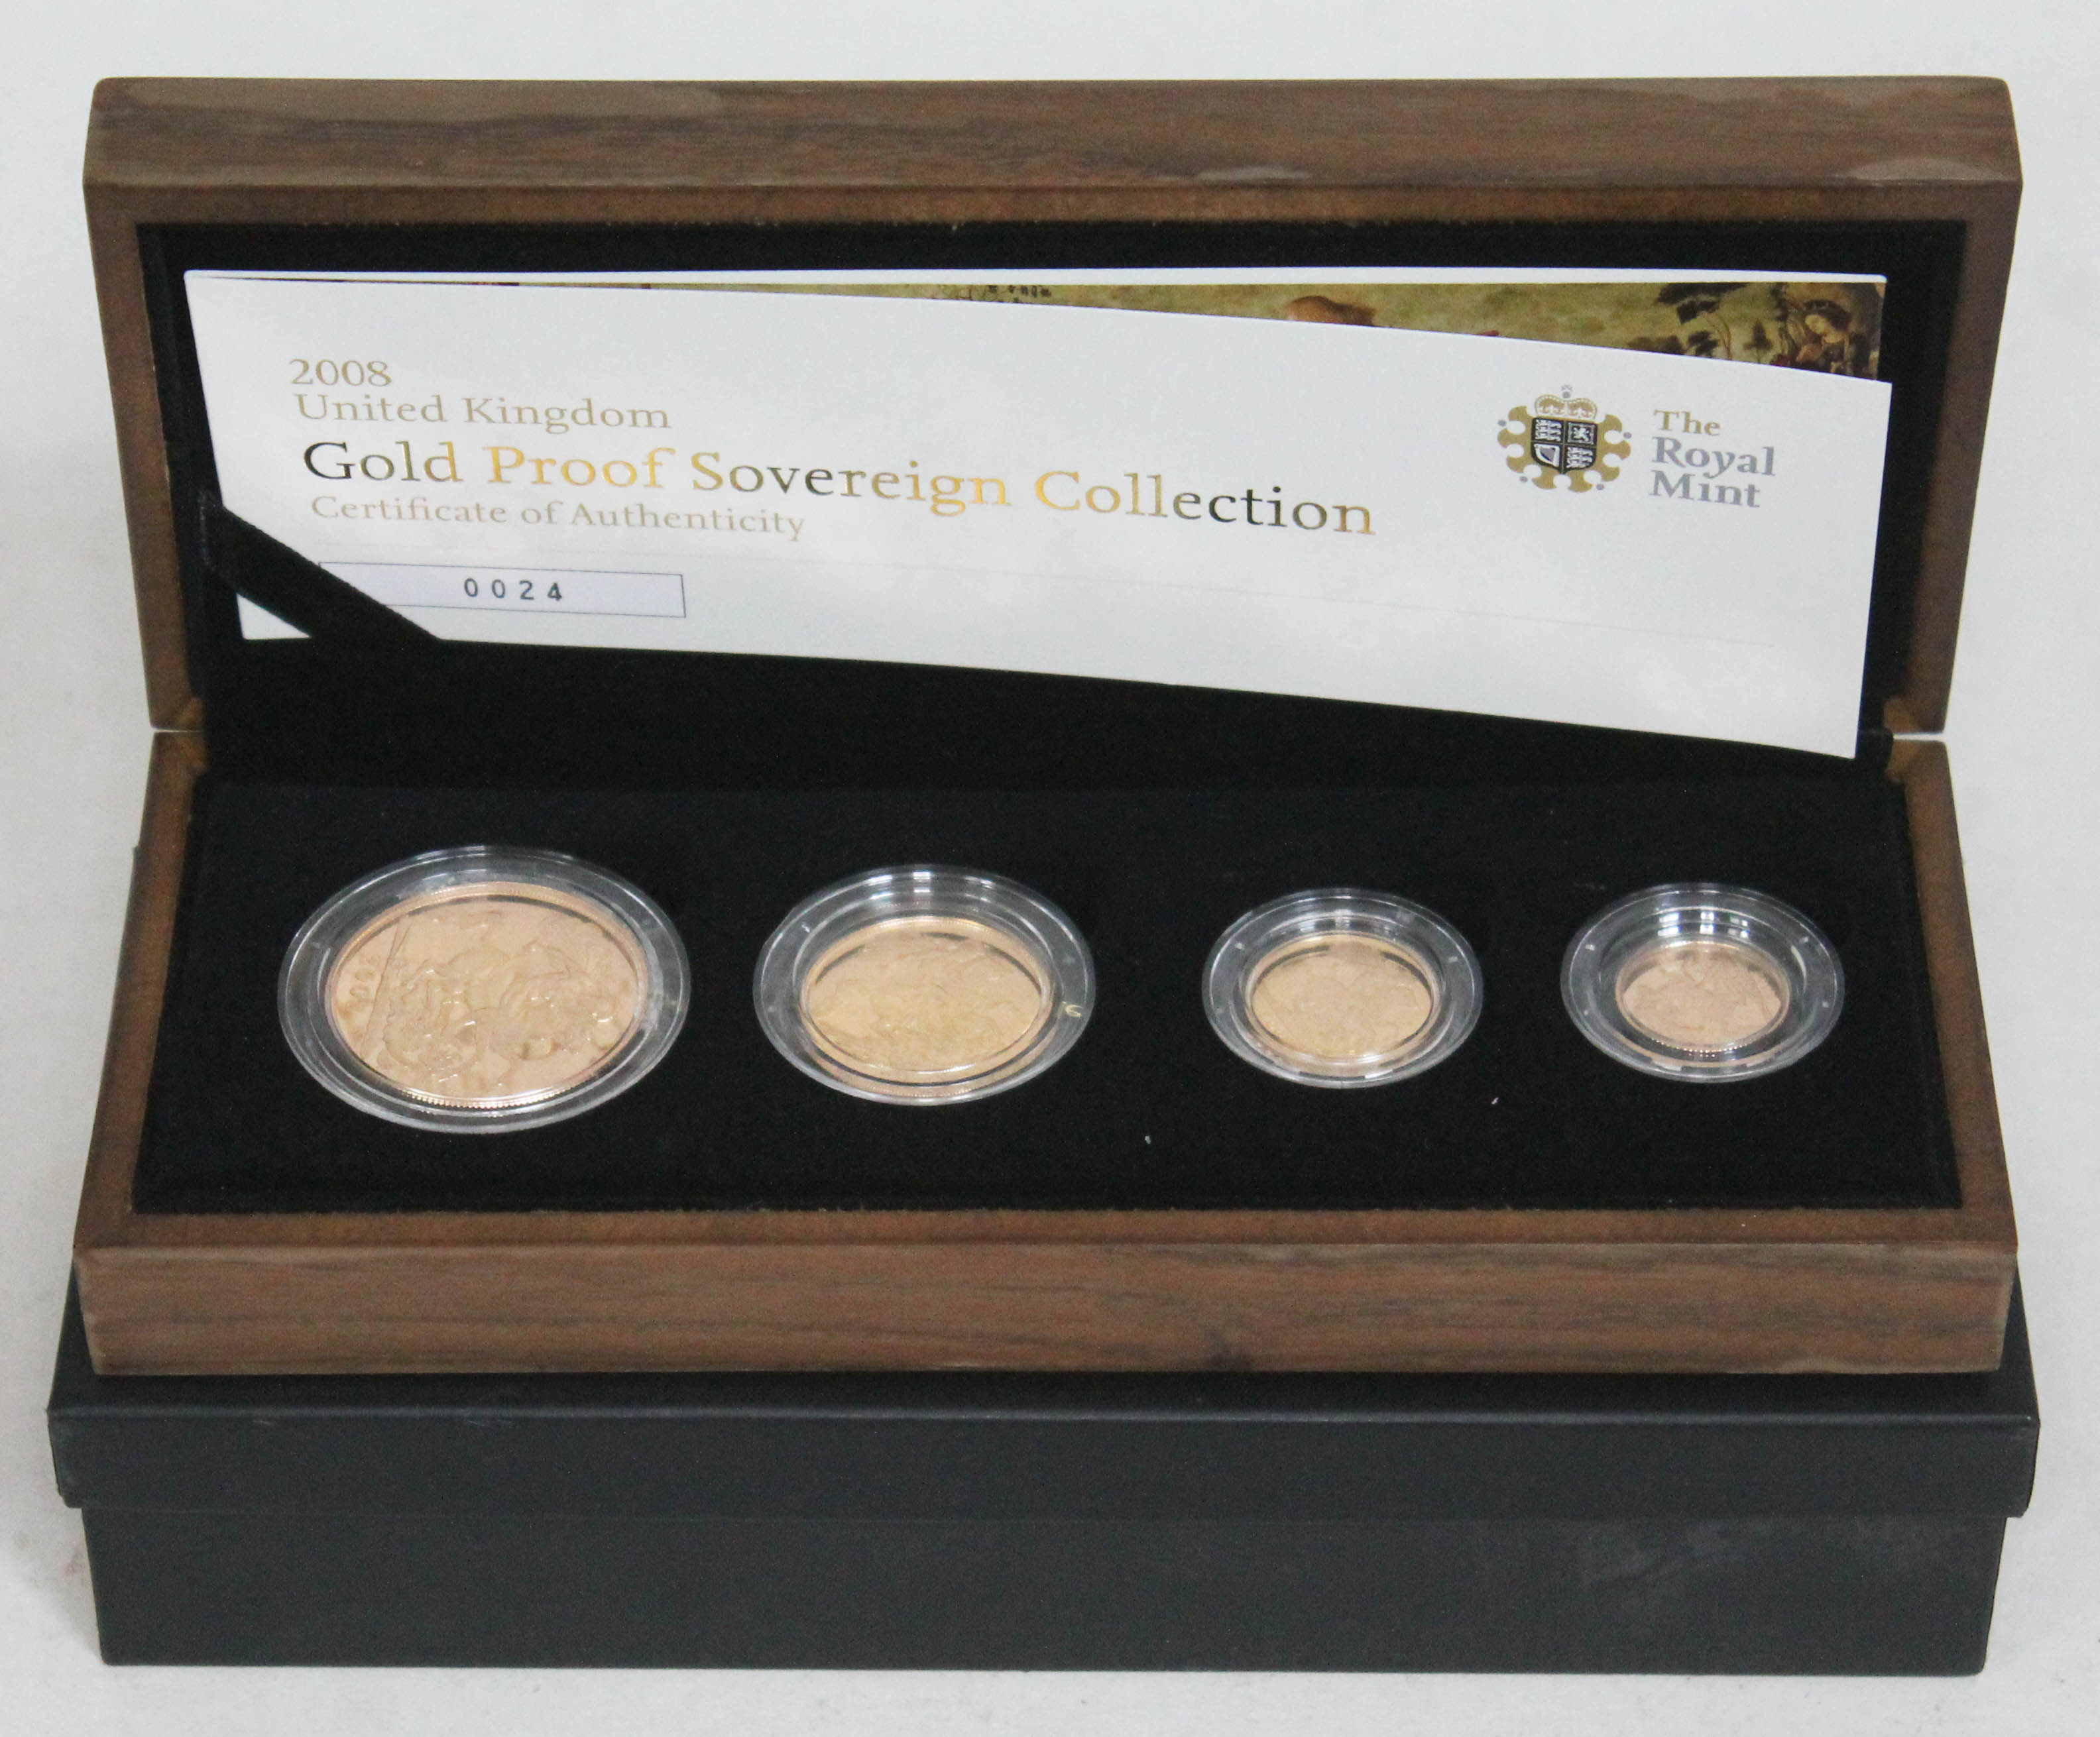 Elizabeth II Royal Mint 2008 Gold Proof Sovereign Collection comprising half sovereign, sovereign,